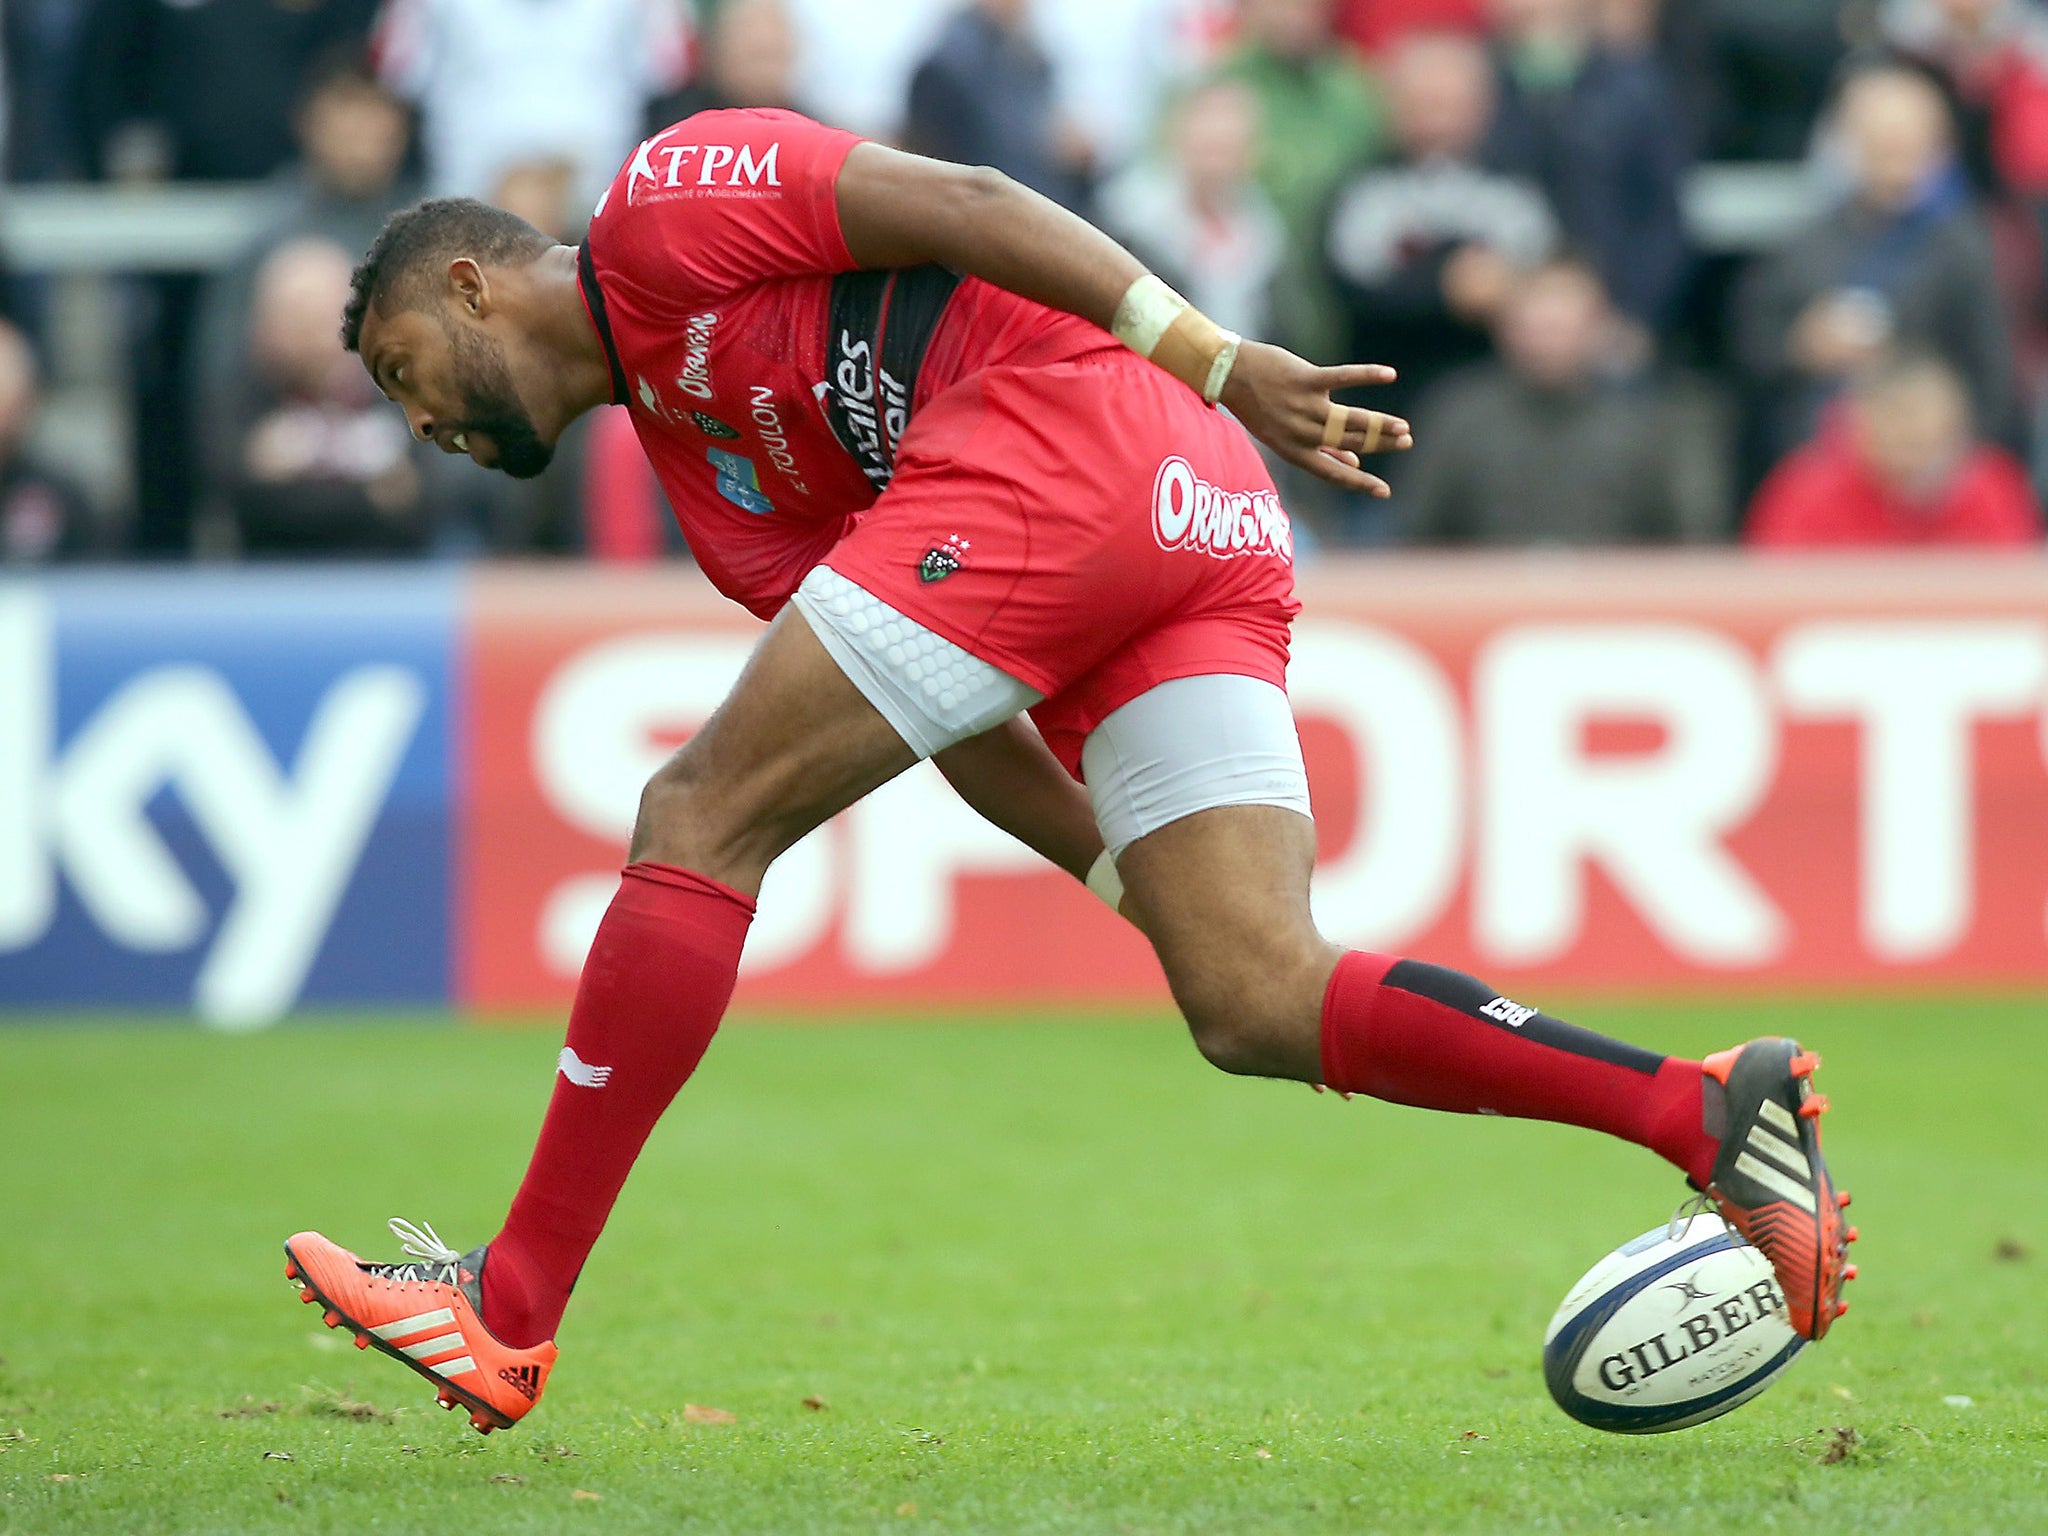 Toulon's English wing Delon Armitage scores his team's second try during the European Rugby Champions Cup match between Ulster and Toulon